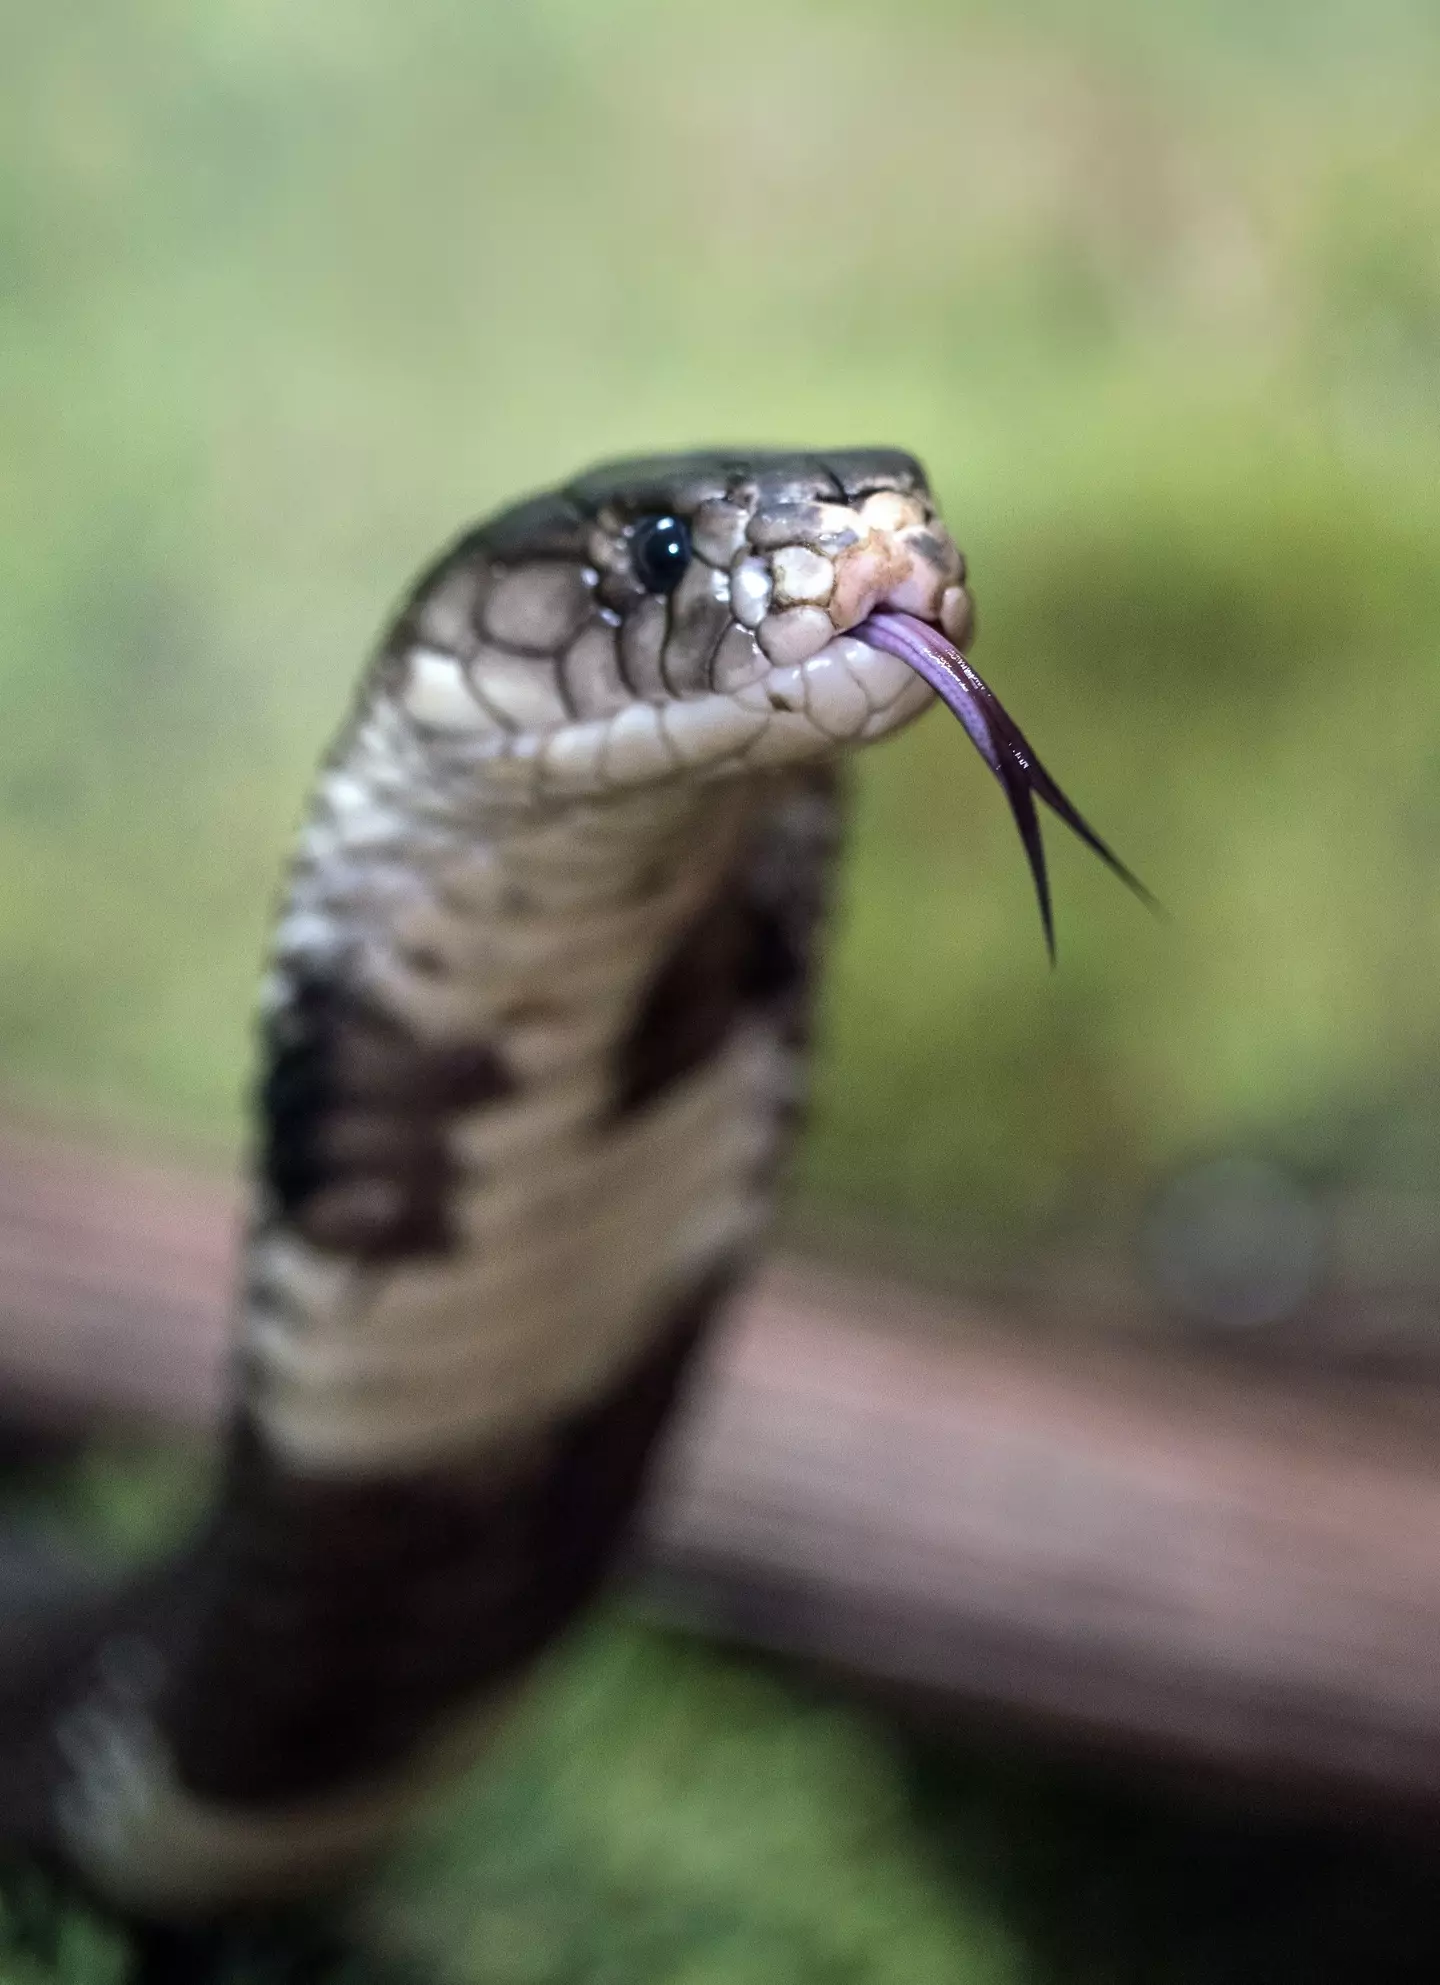 The 'Snake King' passed away in 2006 after being bitten by a king cobra.